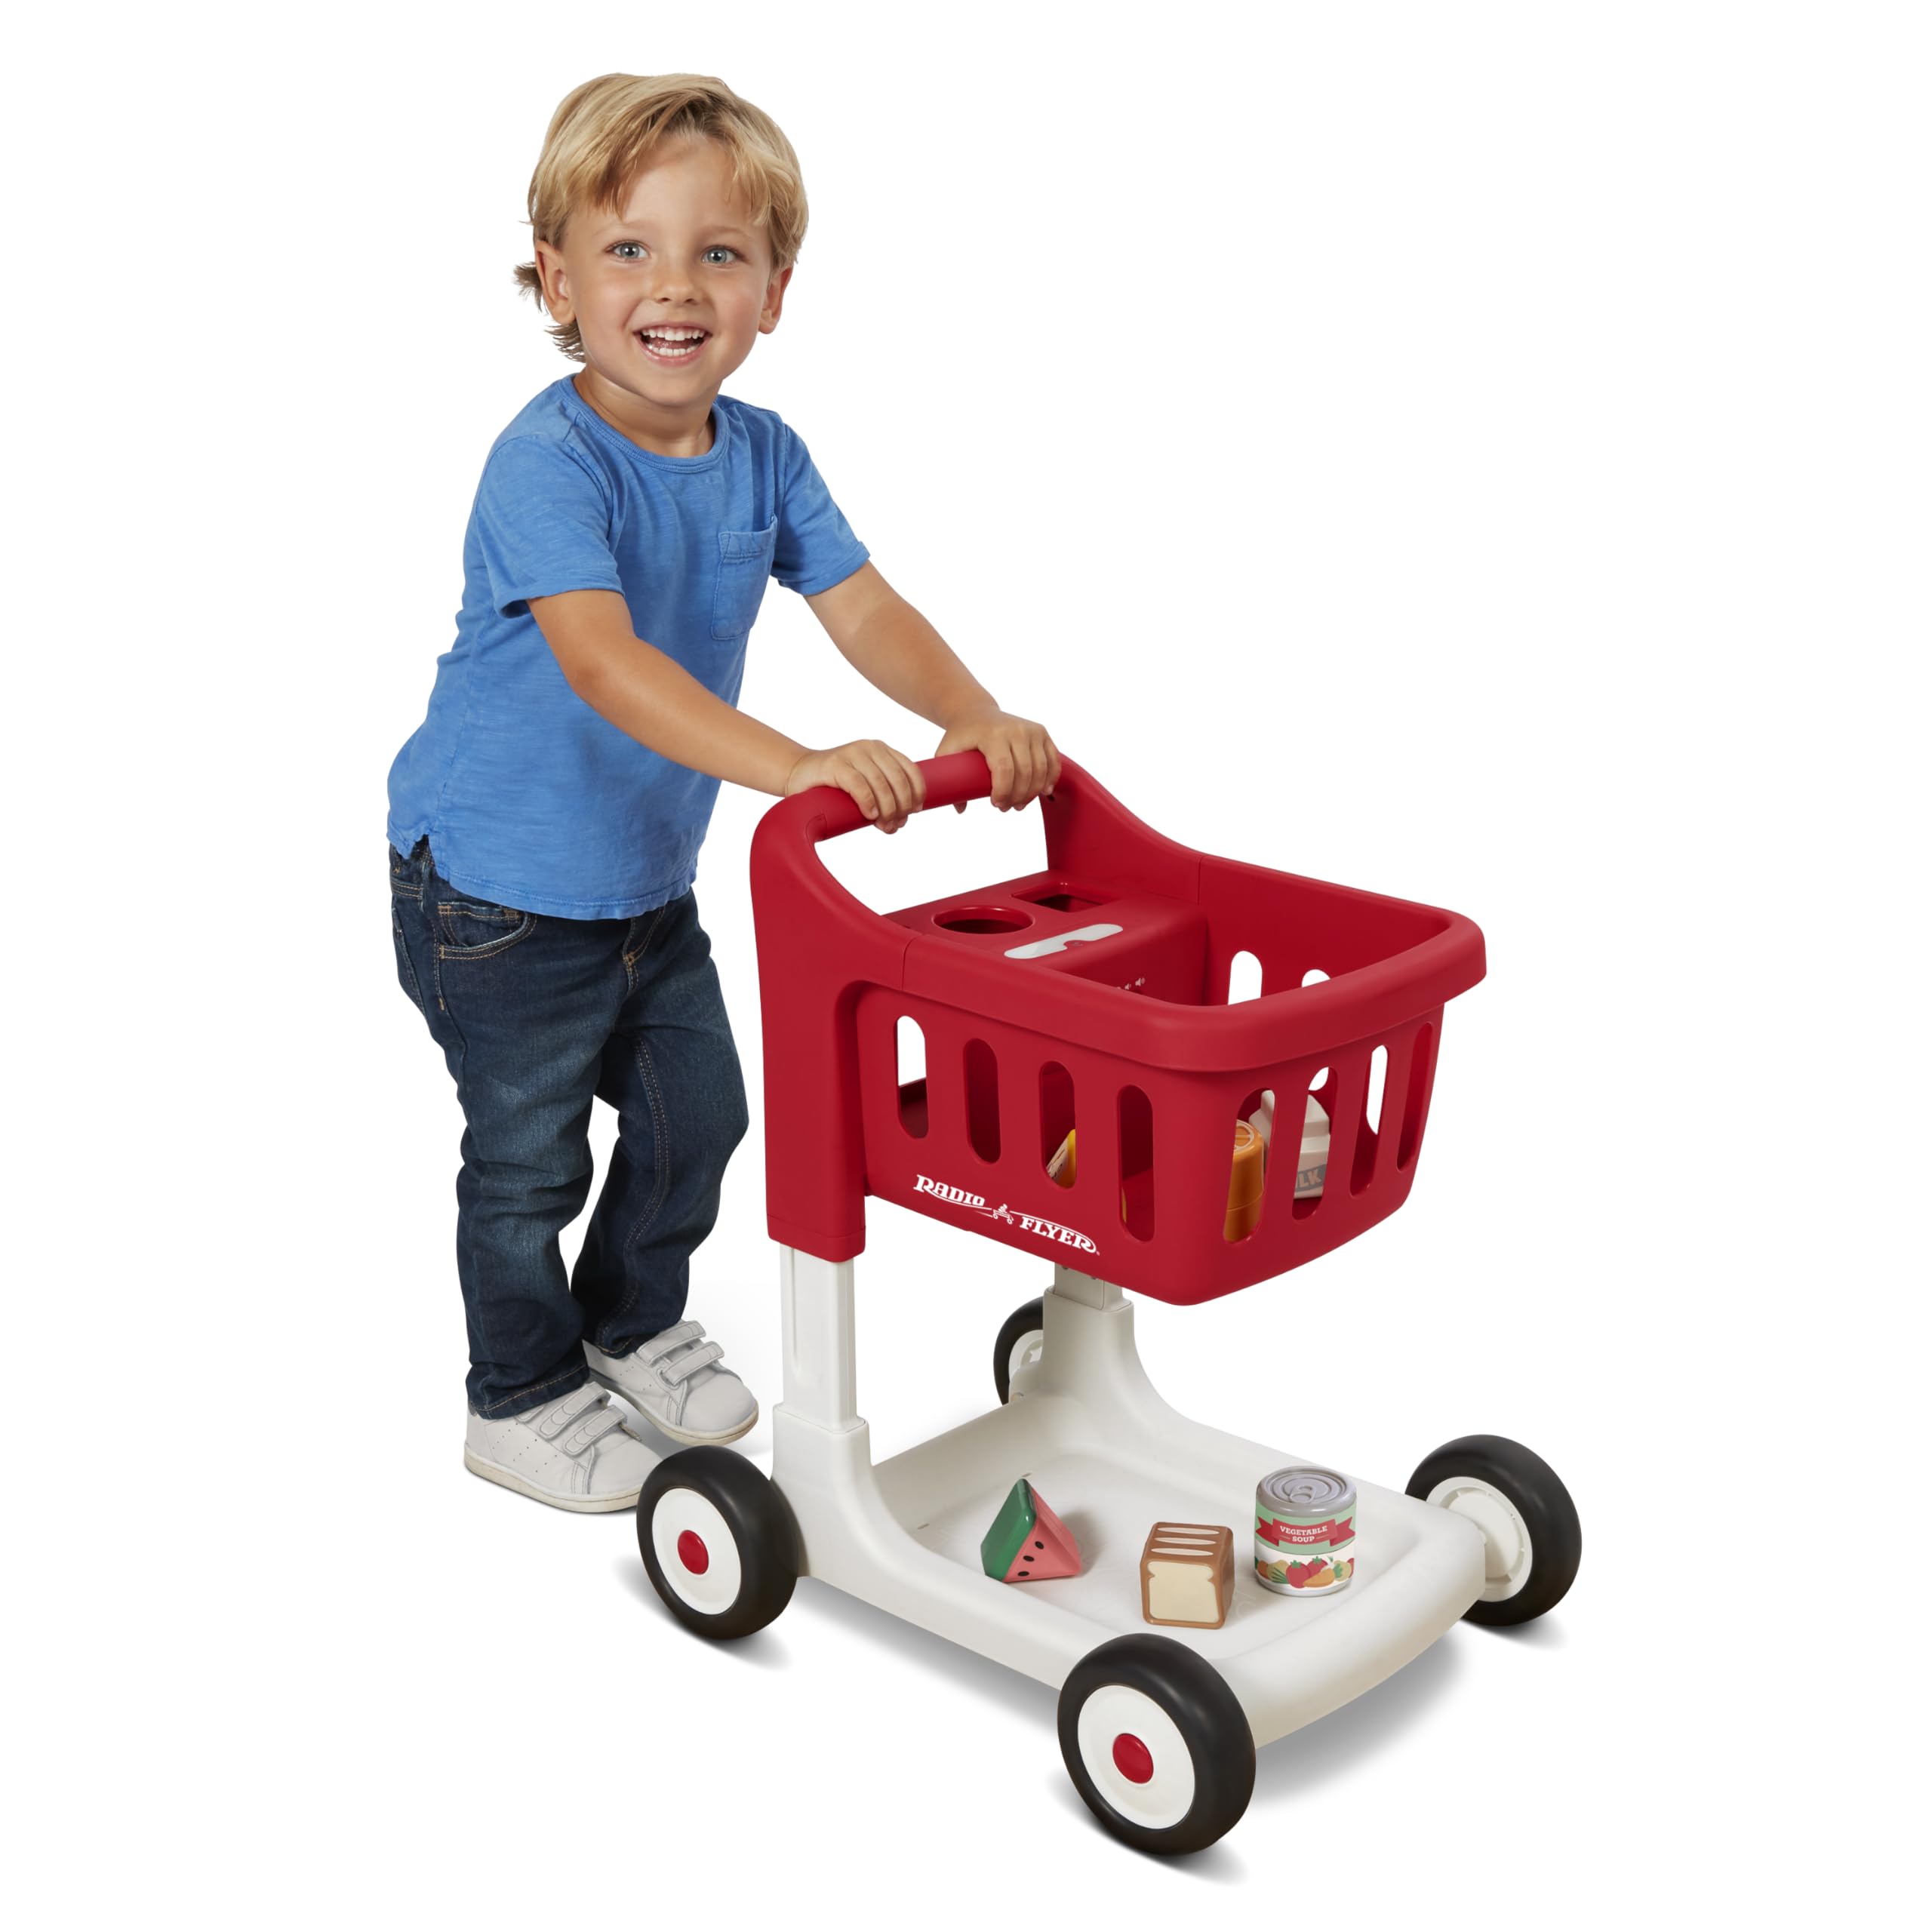 Radio Flyer Scan & Sort Shopping Cart with Lights & Sounds, Baby Walker with Wheels, Red Shopping Cart for Kids Ages 1+